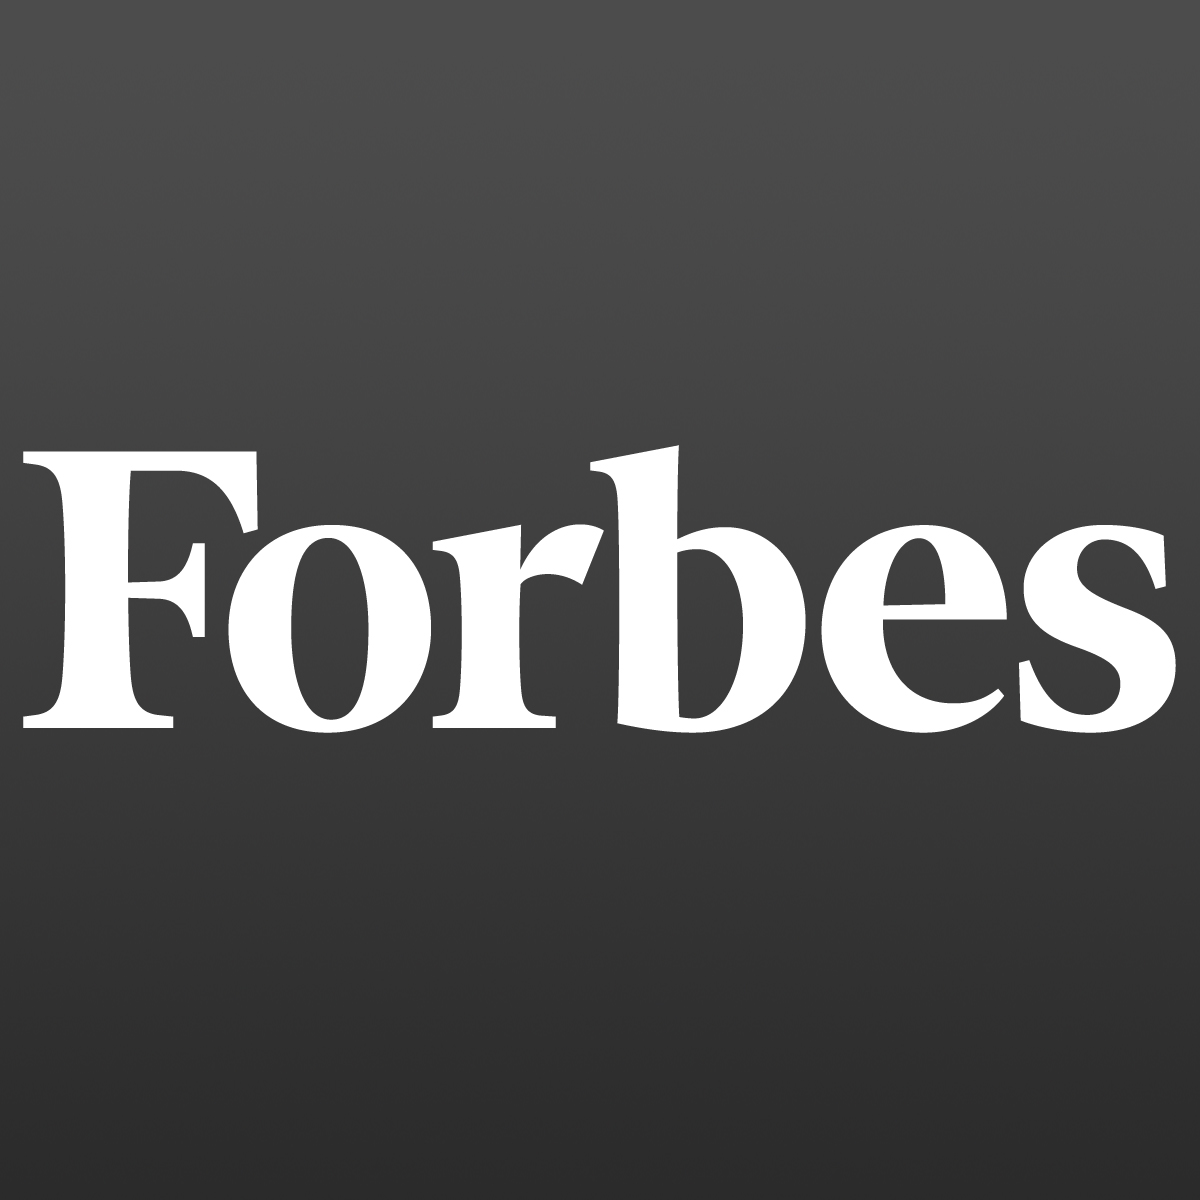 Here is Forbes' 23 Quotes by Top Execs About Bitcoin (BTC) and Blockchain that You Should Read 10